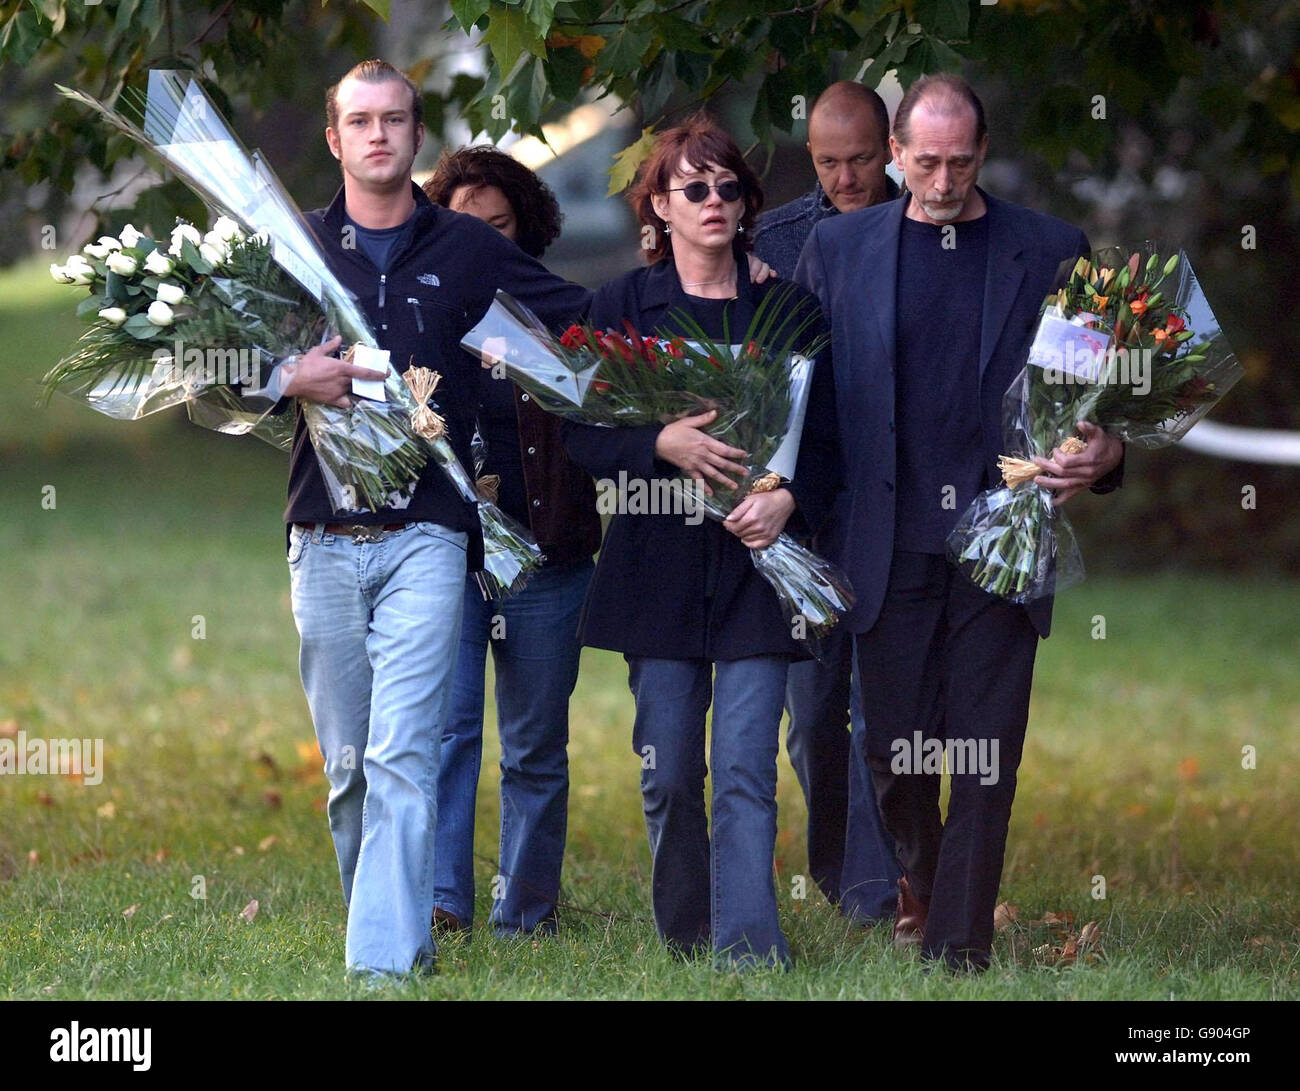 The family of 24-year-old murder victim Jody Dobrowski, arrive at Clapham Common, London, Monday October 17, 2005, to lay flowers at the spot where he was killed. Jody was murdered in a suspected homophobic attack during the early hours of Saturday. From left, Jody's brother Jake, mother Sheri and her partner Mike Haddock. See PA story POLICE Gay. PRESS ASSOCIATION Photo. Photo credit should read: Matthew Fearn/PA Stock Photo